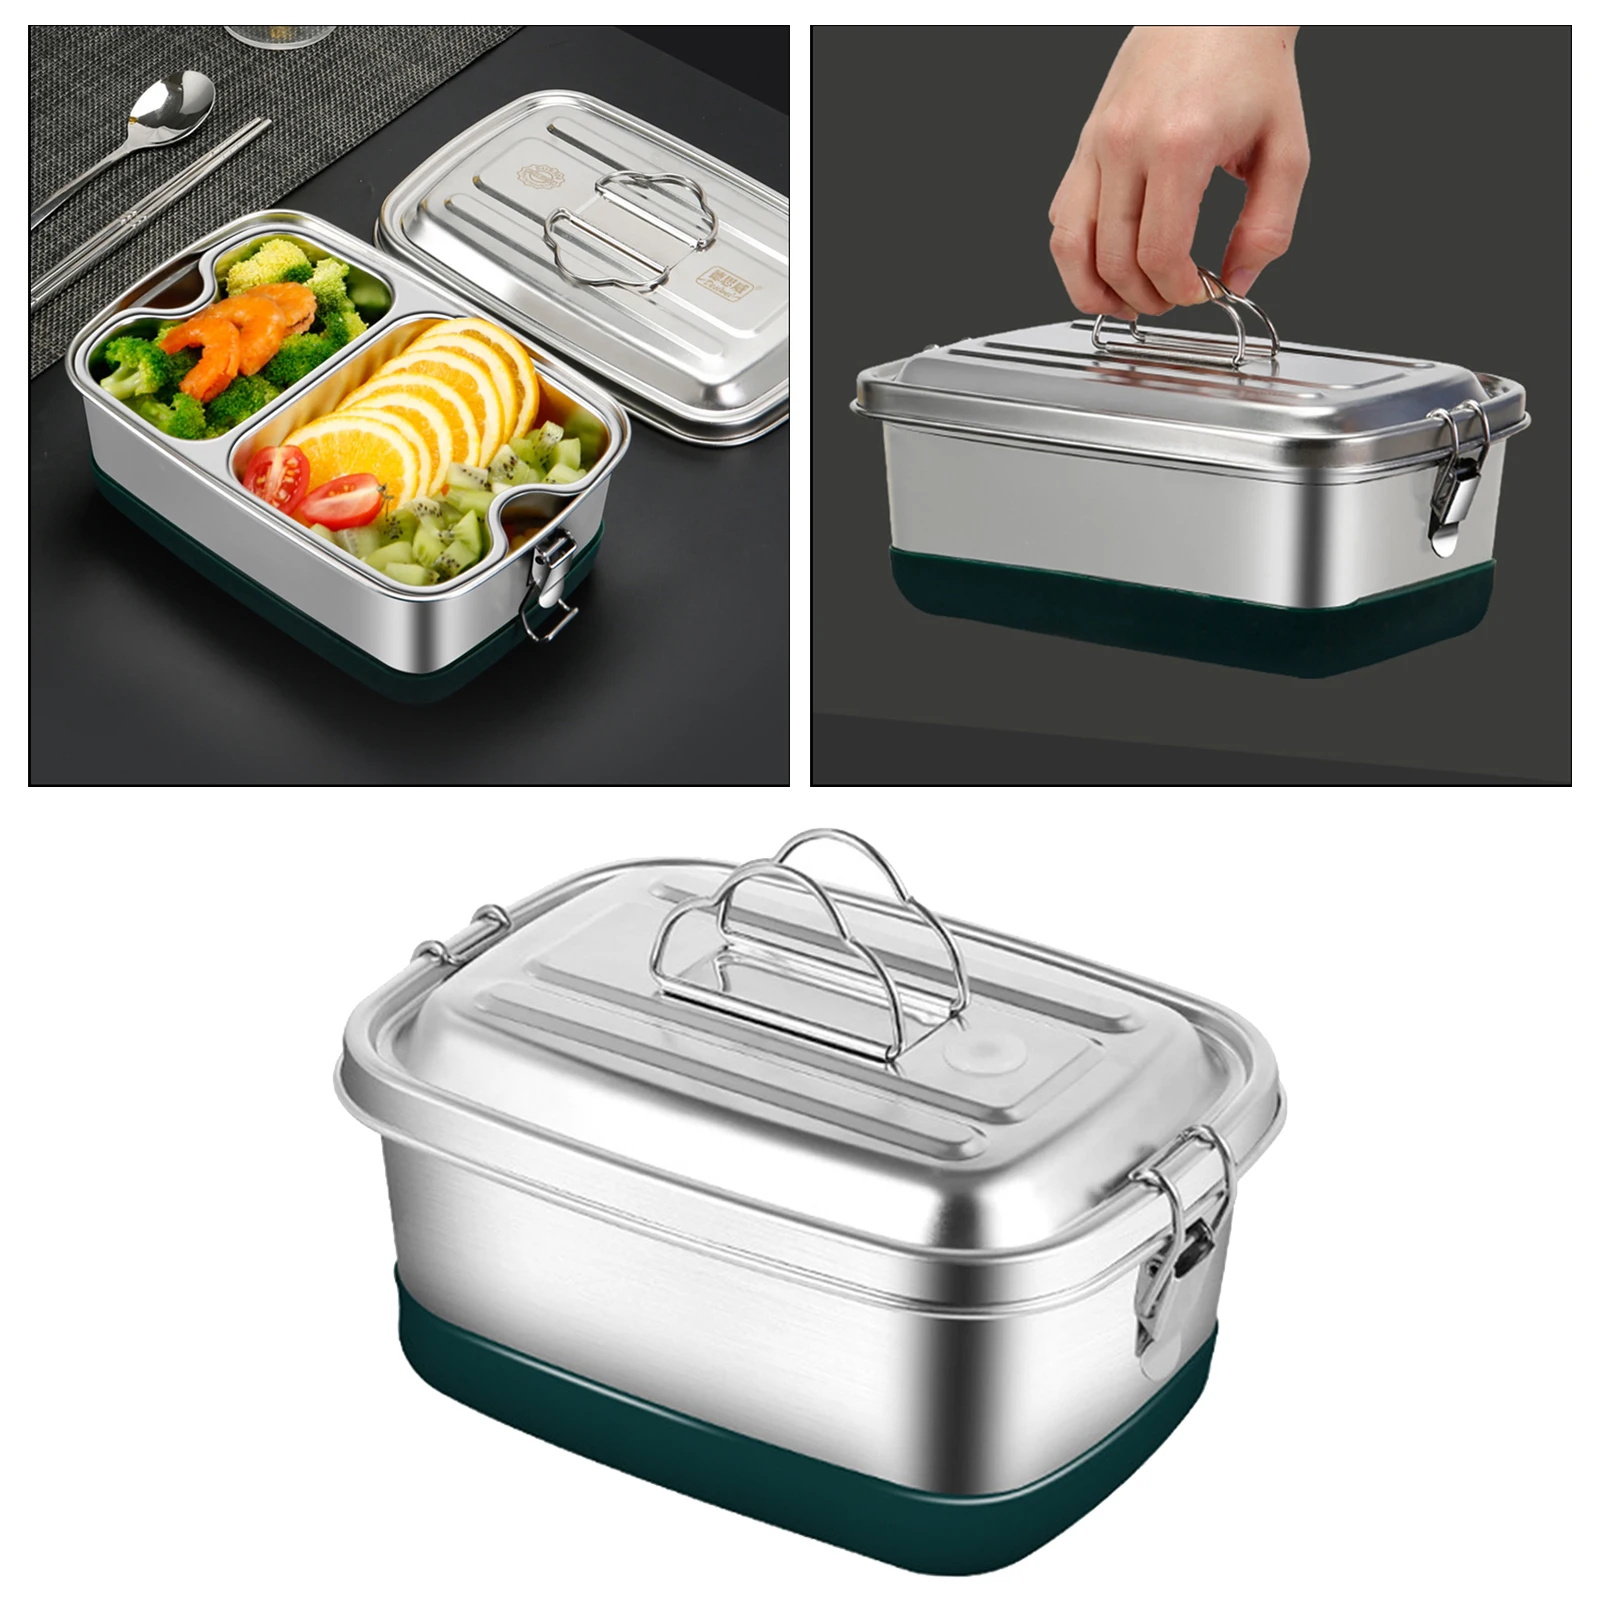 Stainless Steel Bento Lunch Food Box Container, Large Metal Bento Lunch Box Container for Kids or Adults - Dishwasher Safe